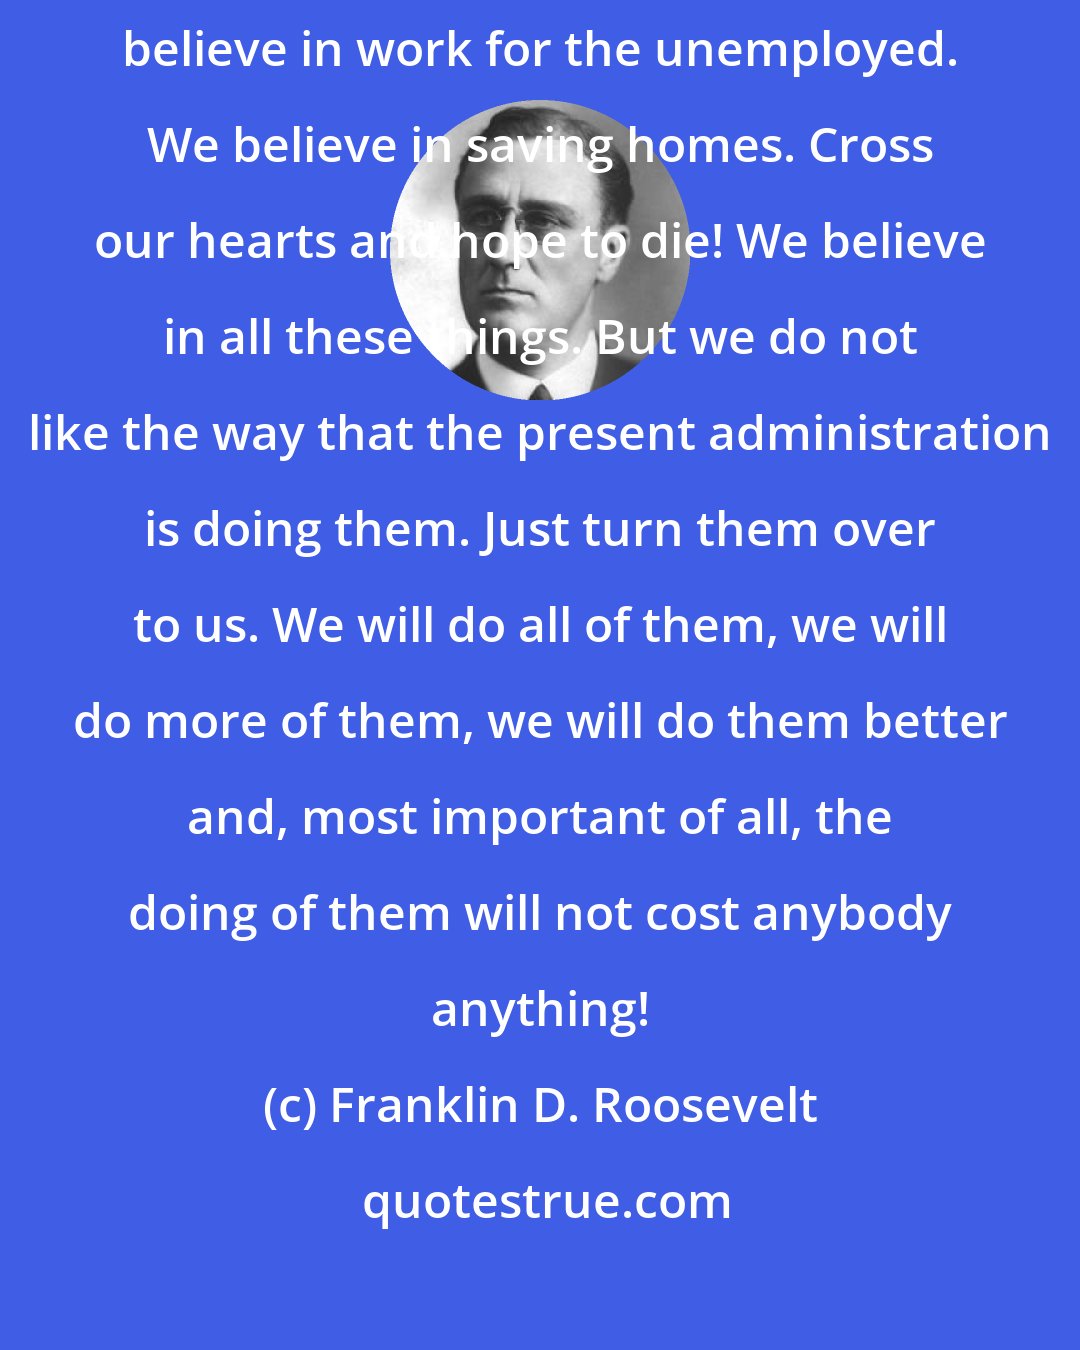 Franklin D. Roosevelt: Of course we believe these things. We believe in social security. We believe in work for the unemployed. We believe in saving homes. Cross our hearts and hope to die! We believe in all these things. But we do not like the way that the present administration is doing them. Just turn them over to us. We will do all of them, we will do more of them, we will do them better and, most important of all, the doing of them will not cost anybody anything!